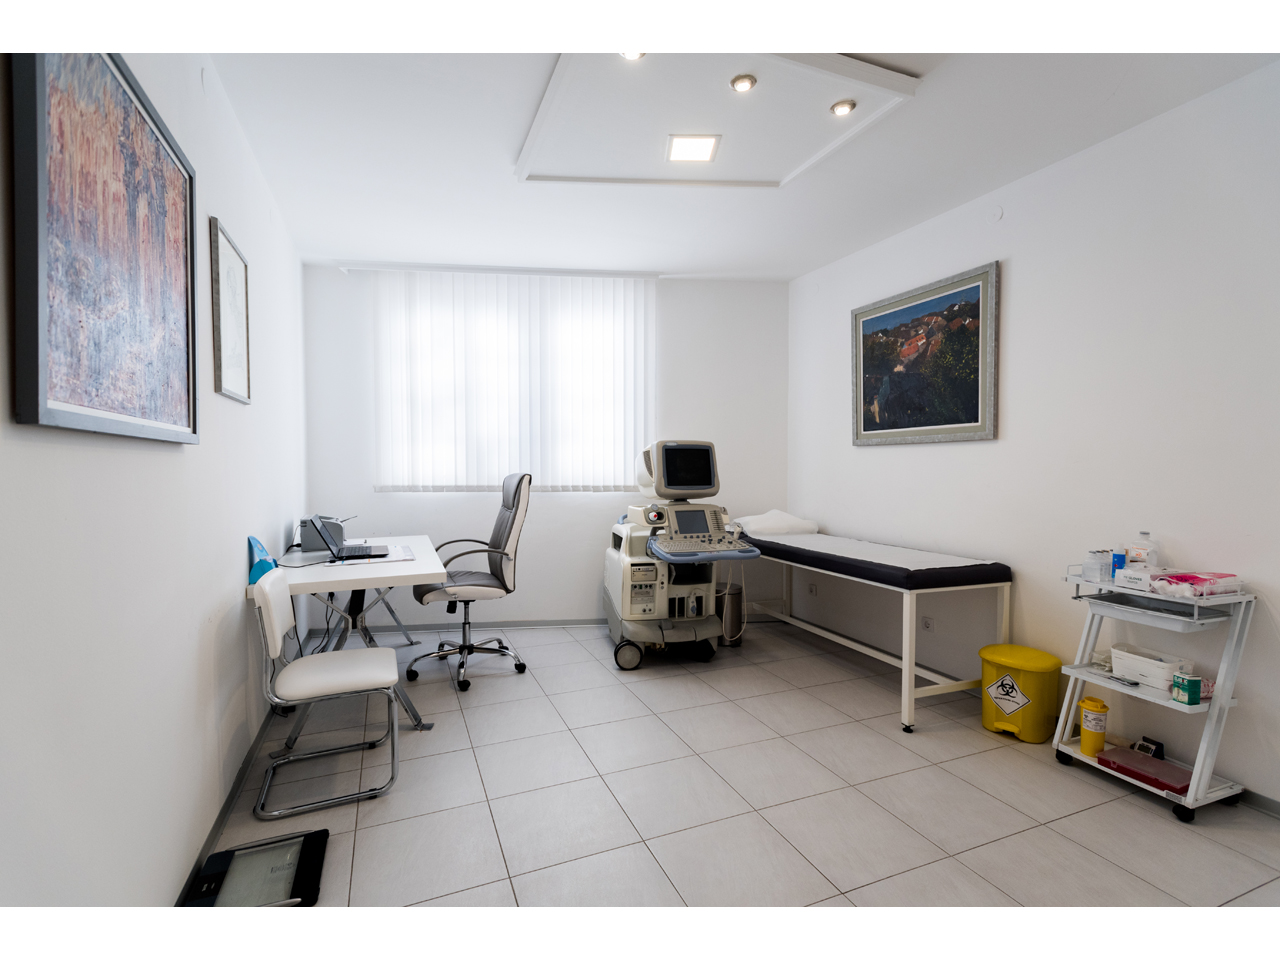 PAIN AND PHYSICAL THERAPY CENTER ANALGESIS Physical medicine Belgrade - Photo 5